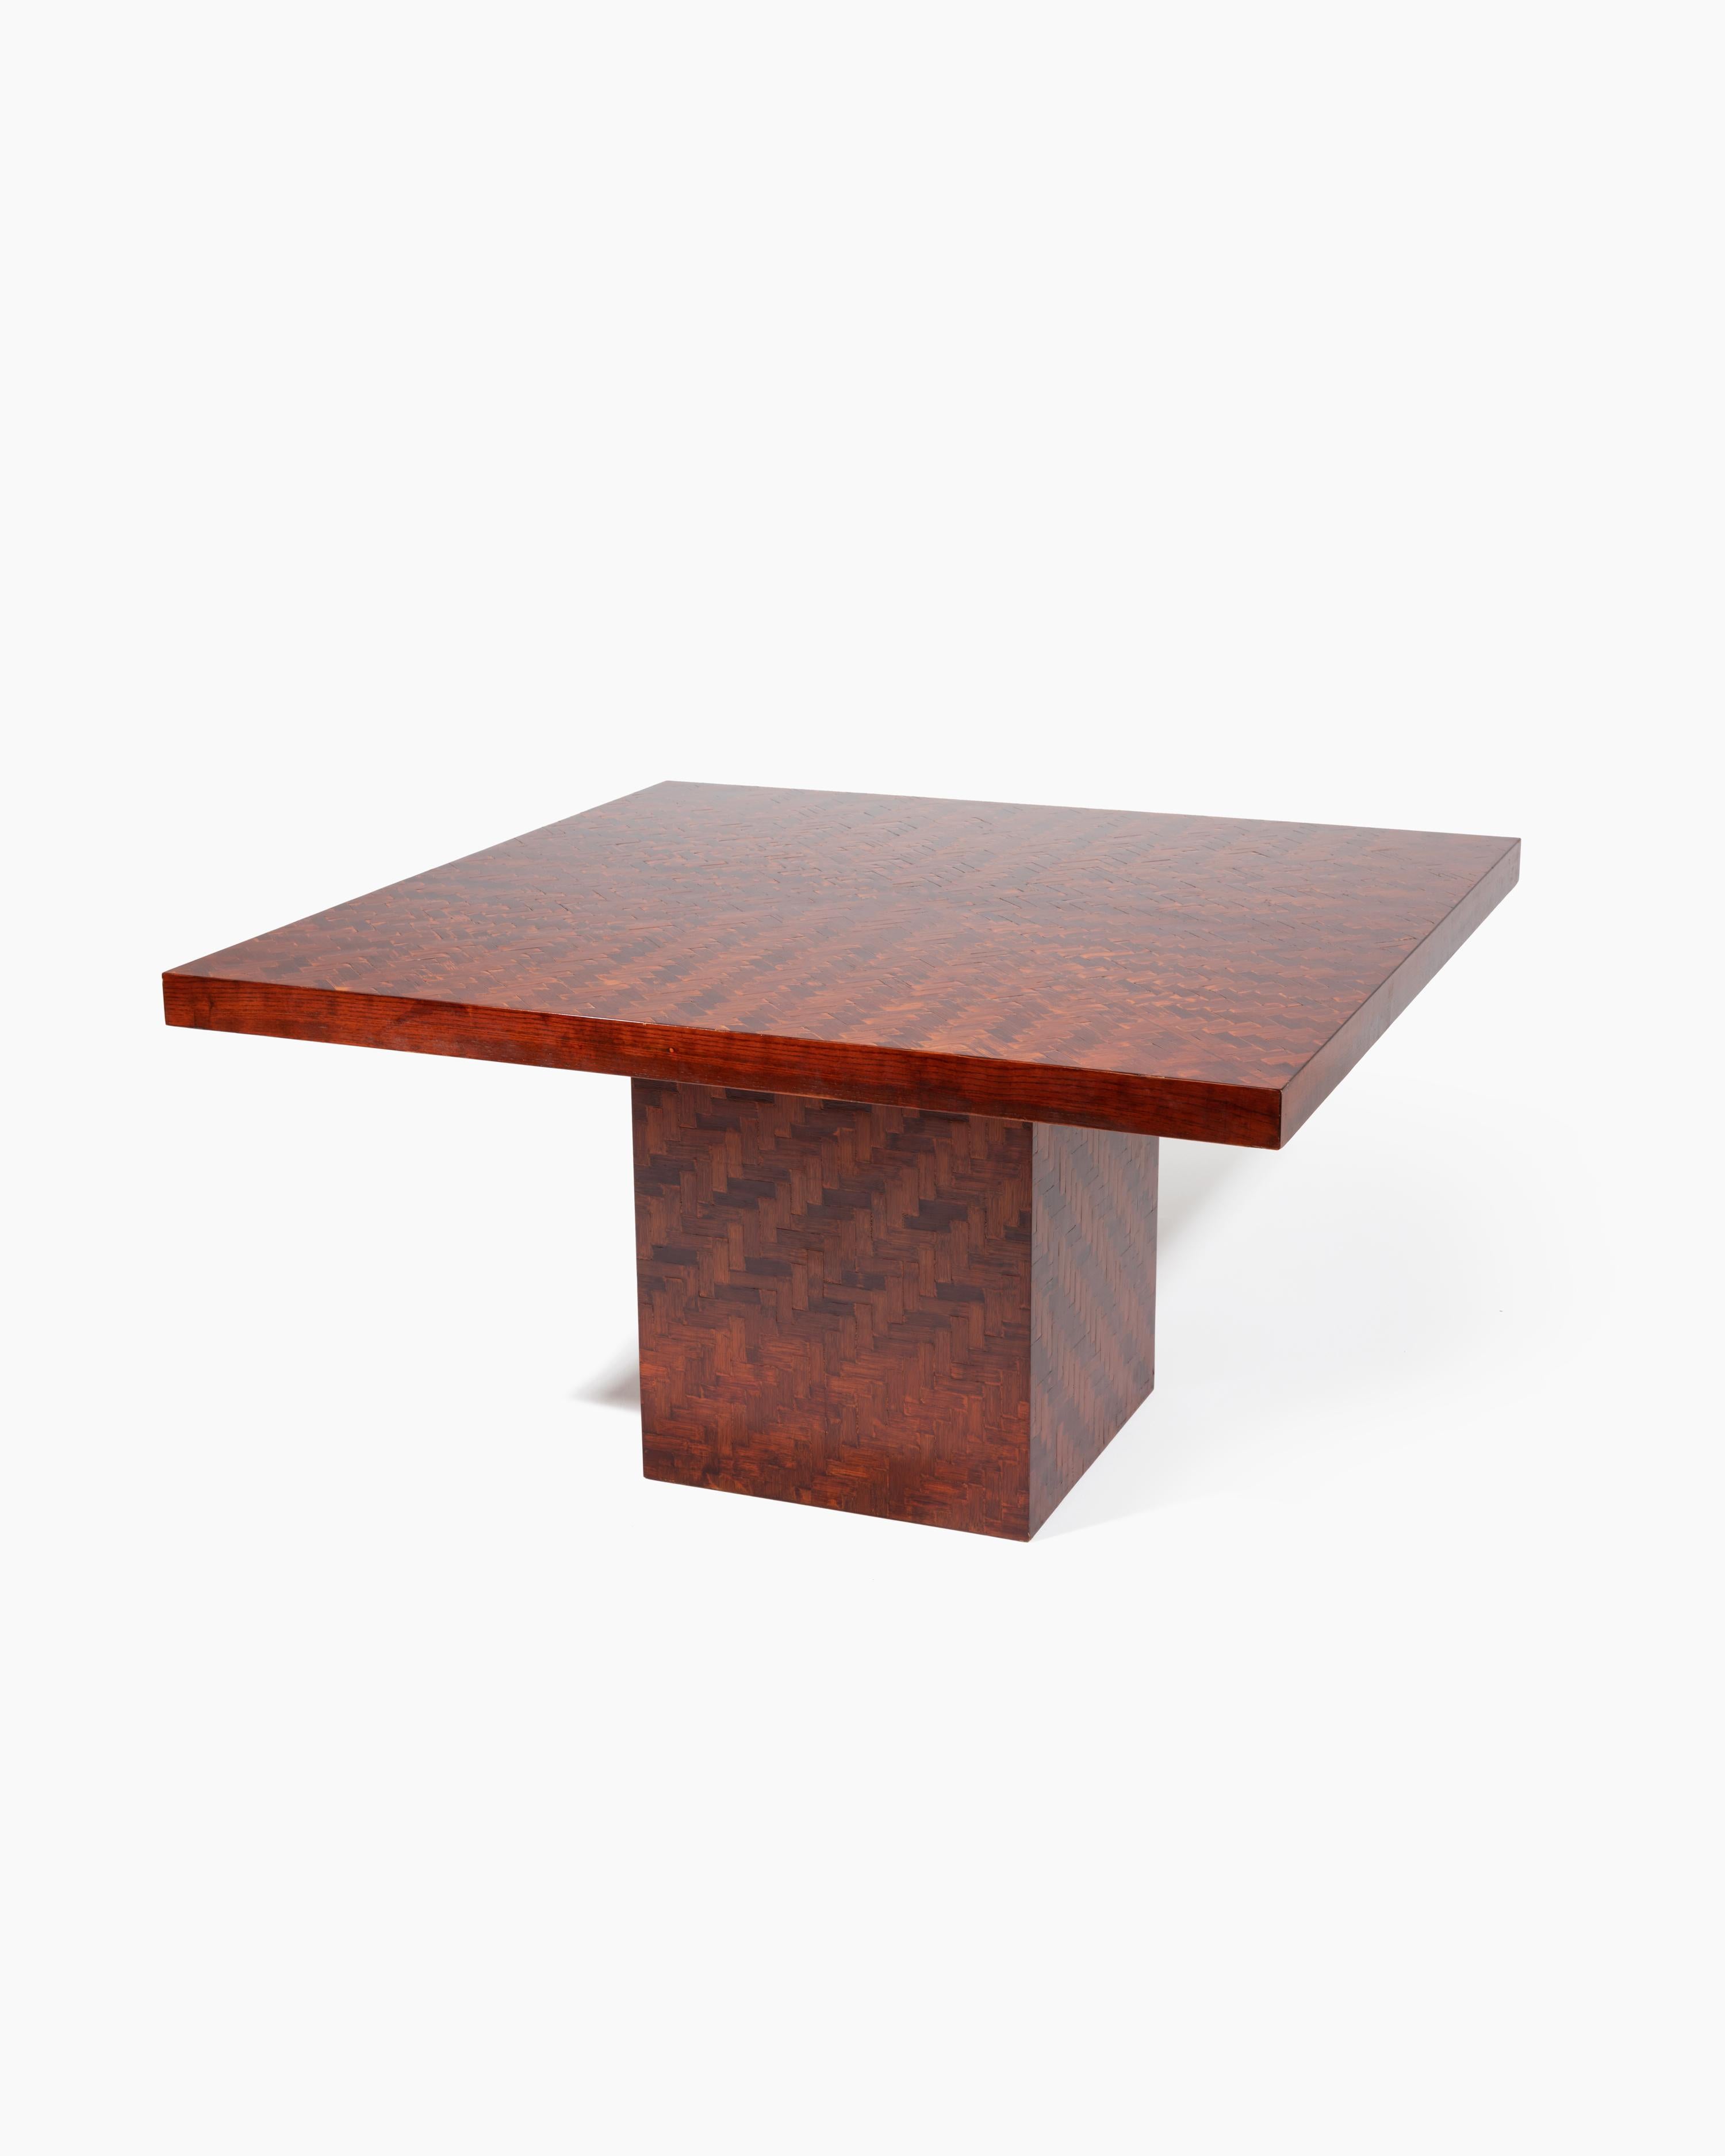 Italian Square Dining Table for Turri with Dyed Banana Leaf Weaving ontop of Wood, 1970s For Sale